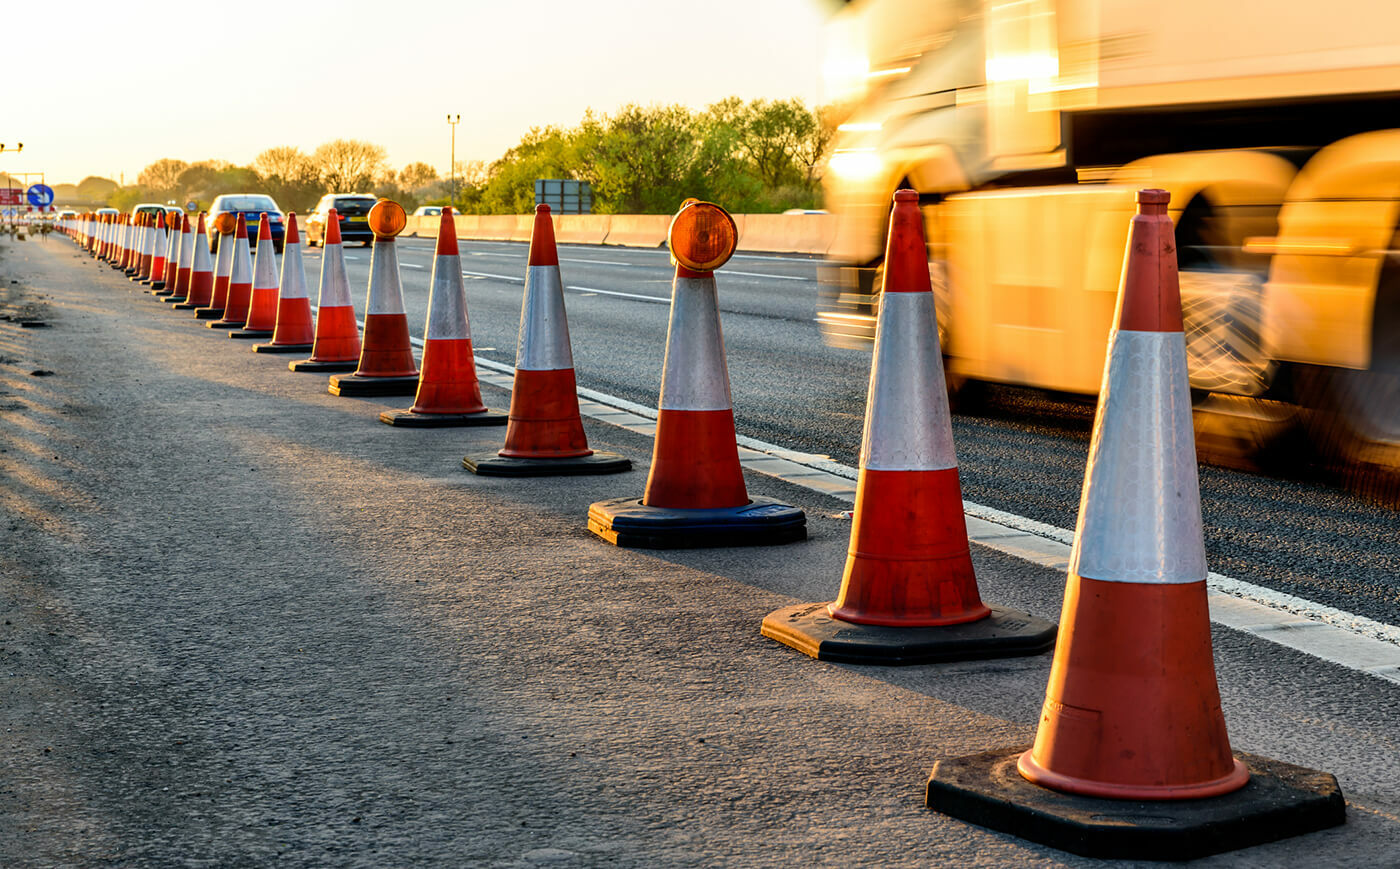 Streets consultancy services - image of cones